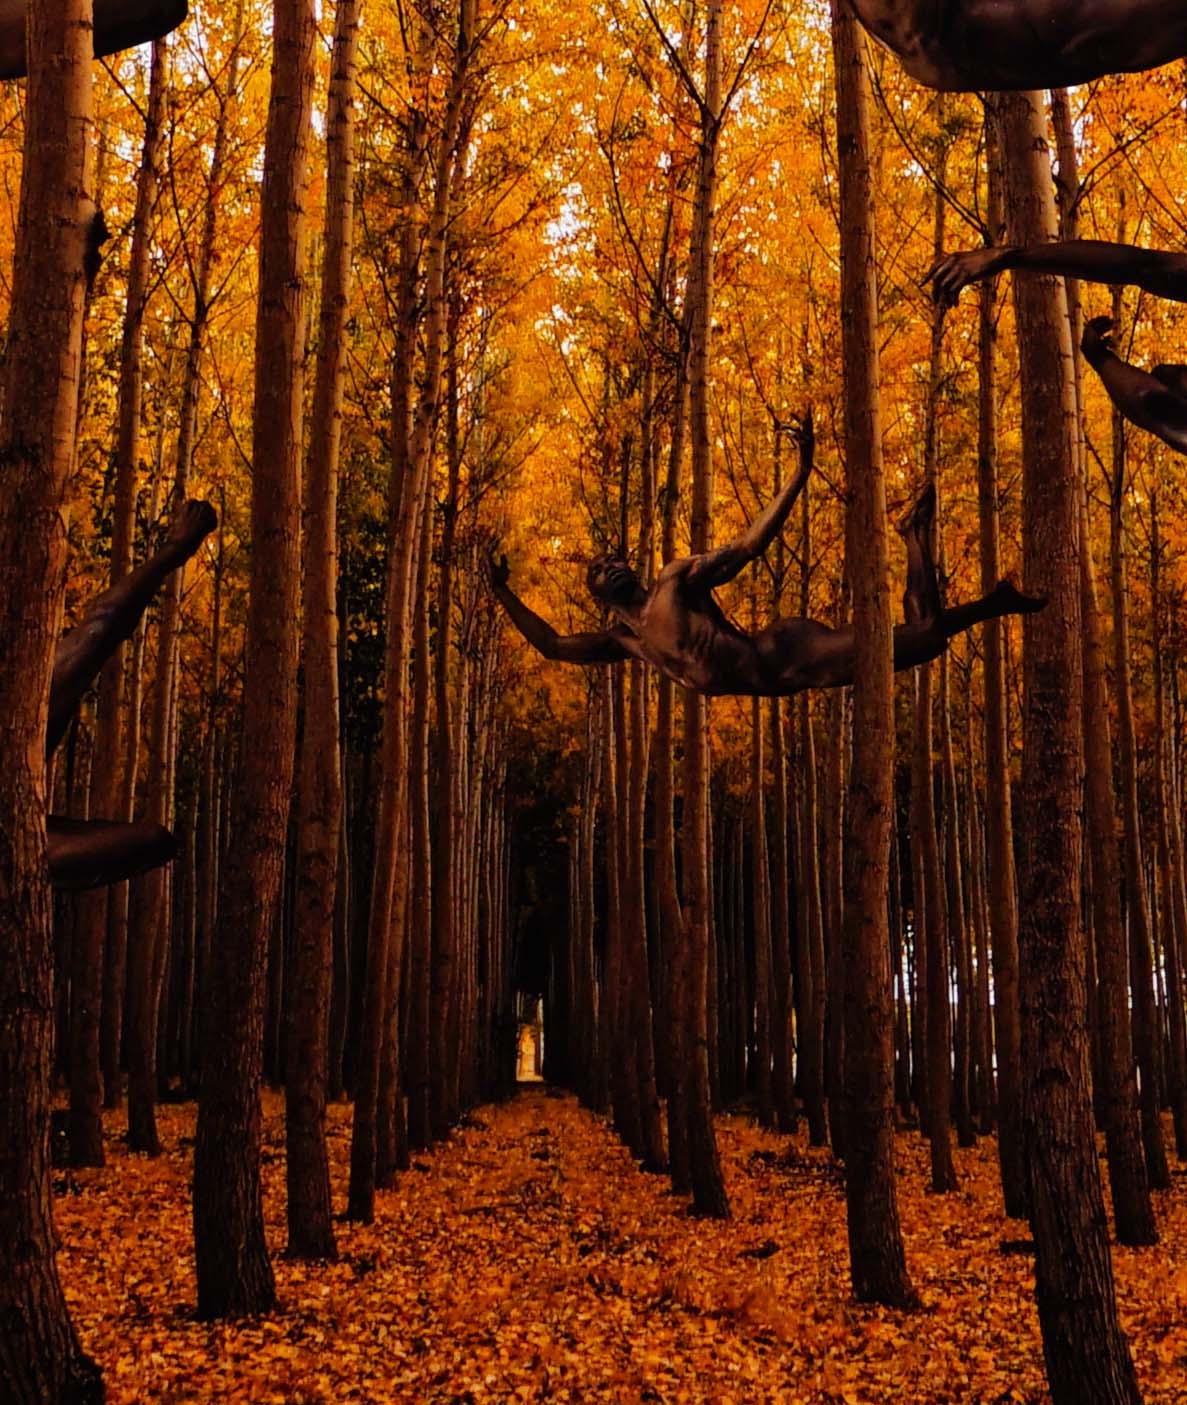 Formation (Male nude bodies are integral to Autumn foliage)) - Surrealist Photograph by Omer Ga'ash